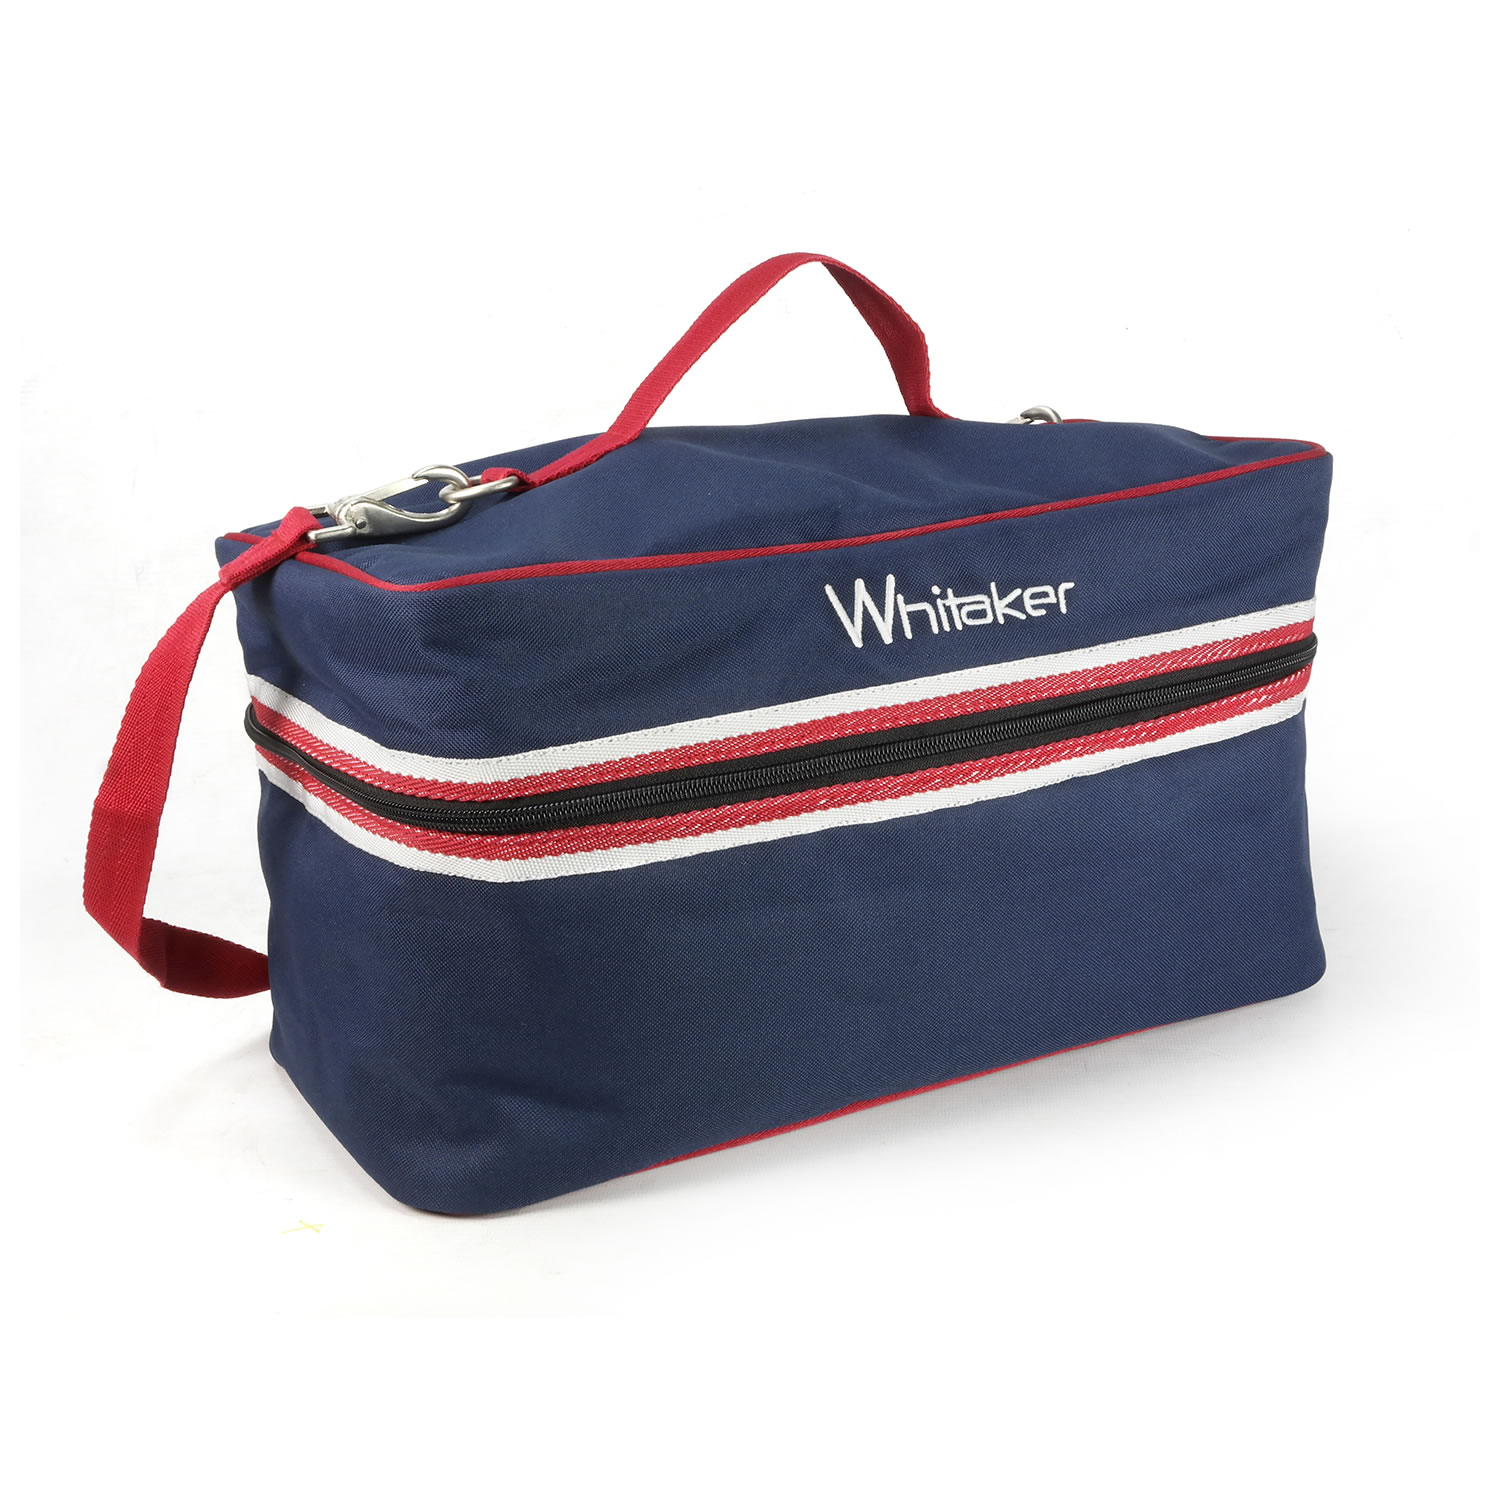 WHITAKER KETTLEWELL GROOMING BAG ONE SIZE